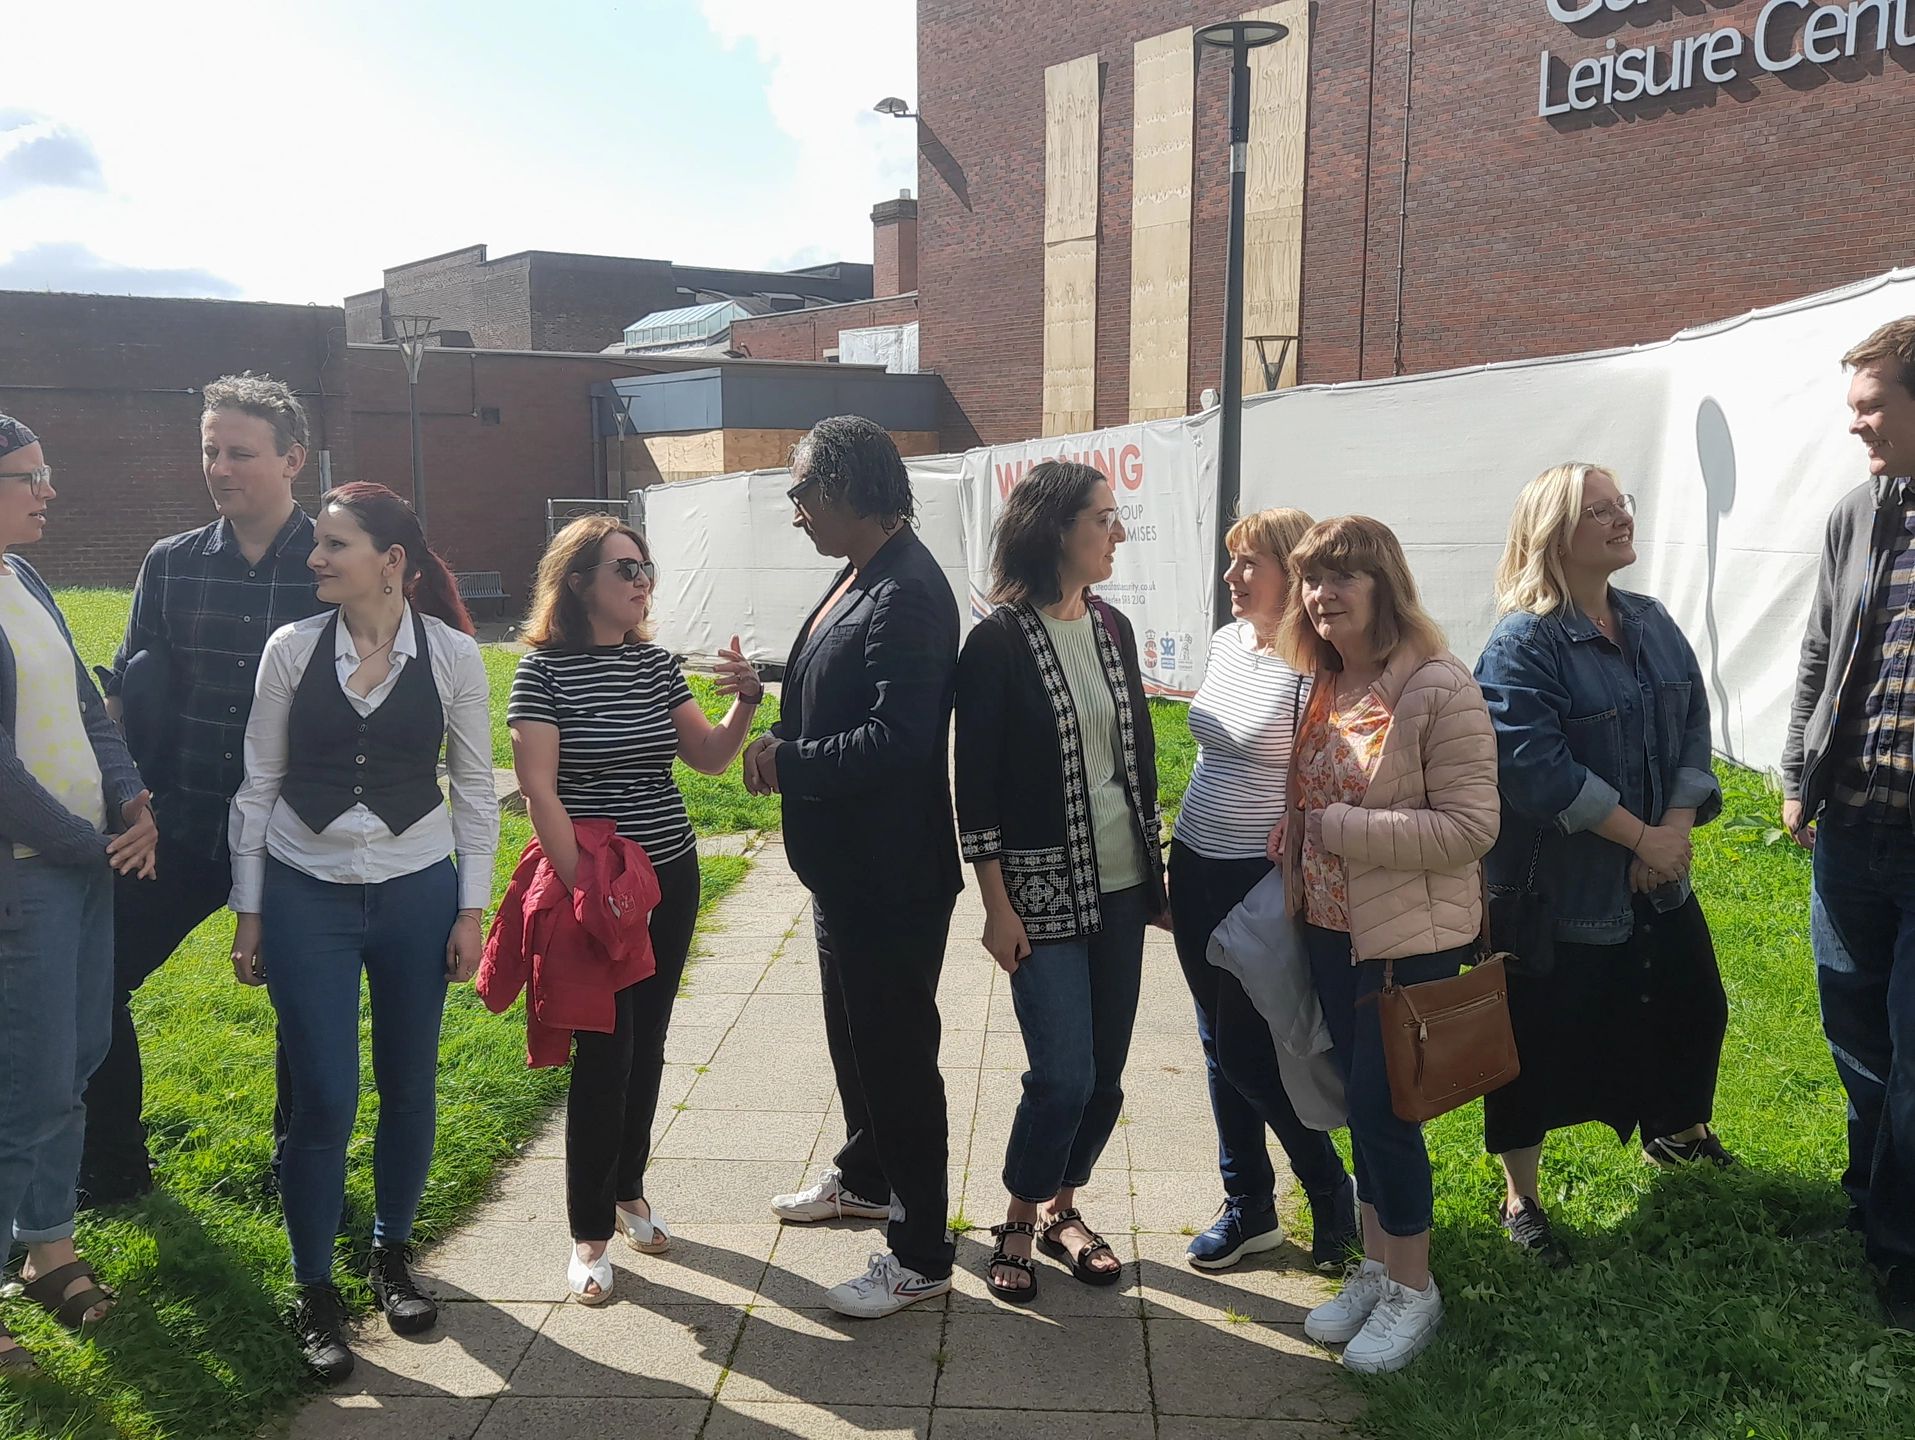 People stood together in a group outside a boarded up Gateshead leisure centre